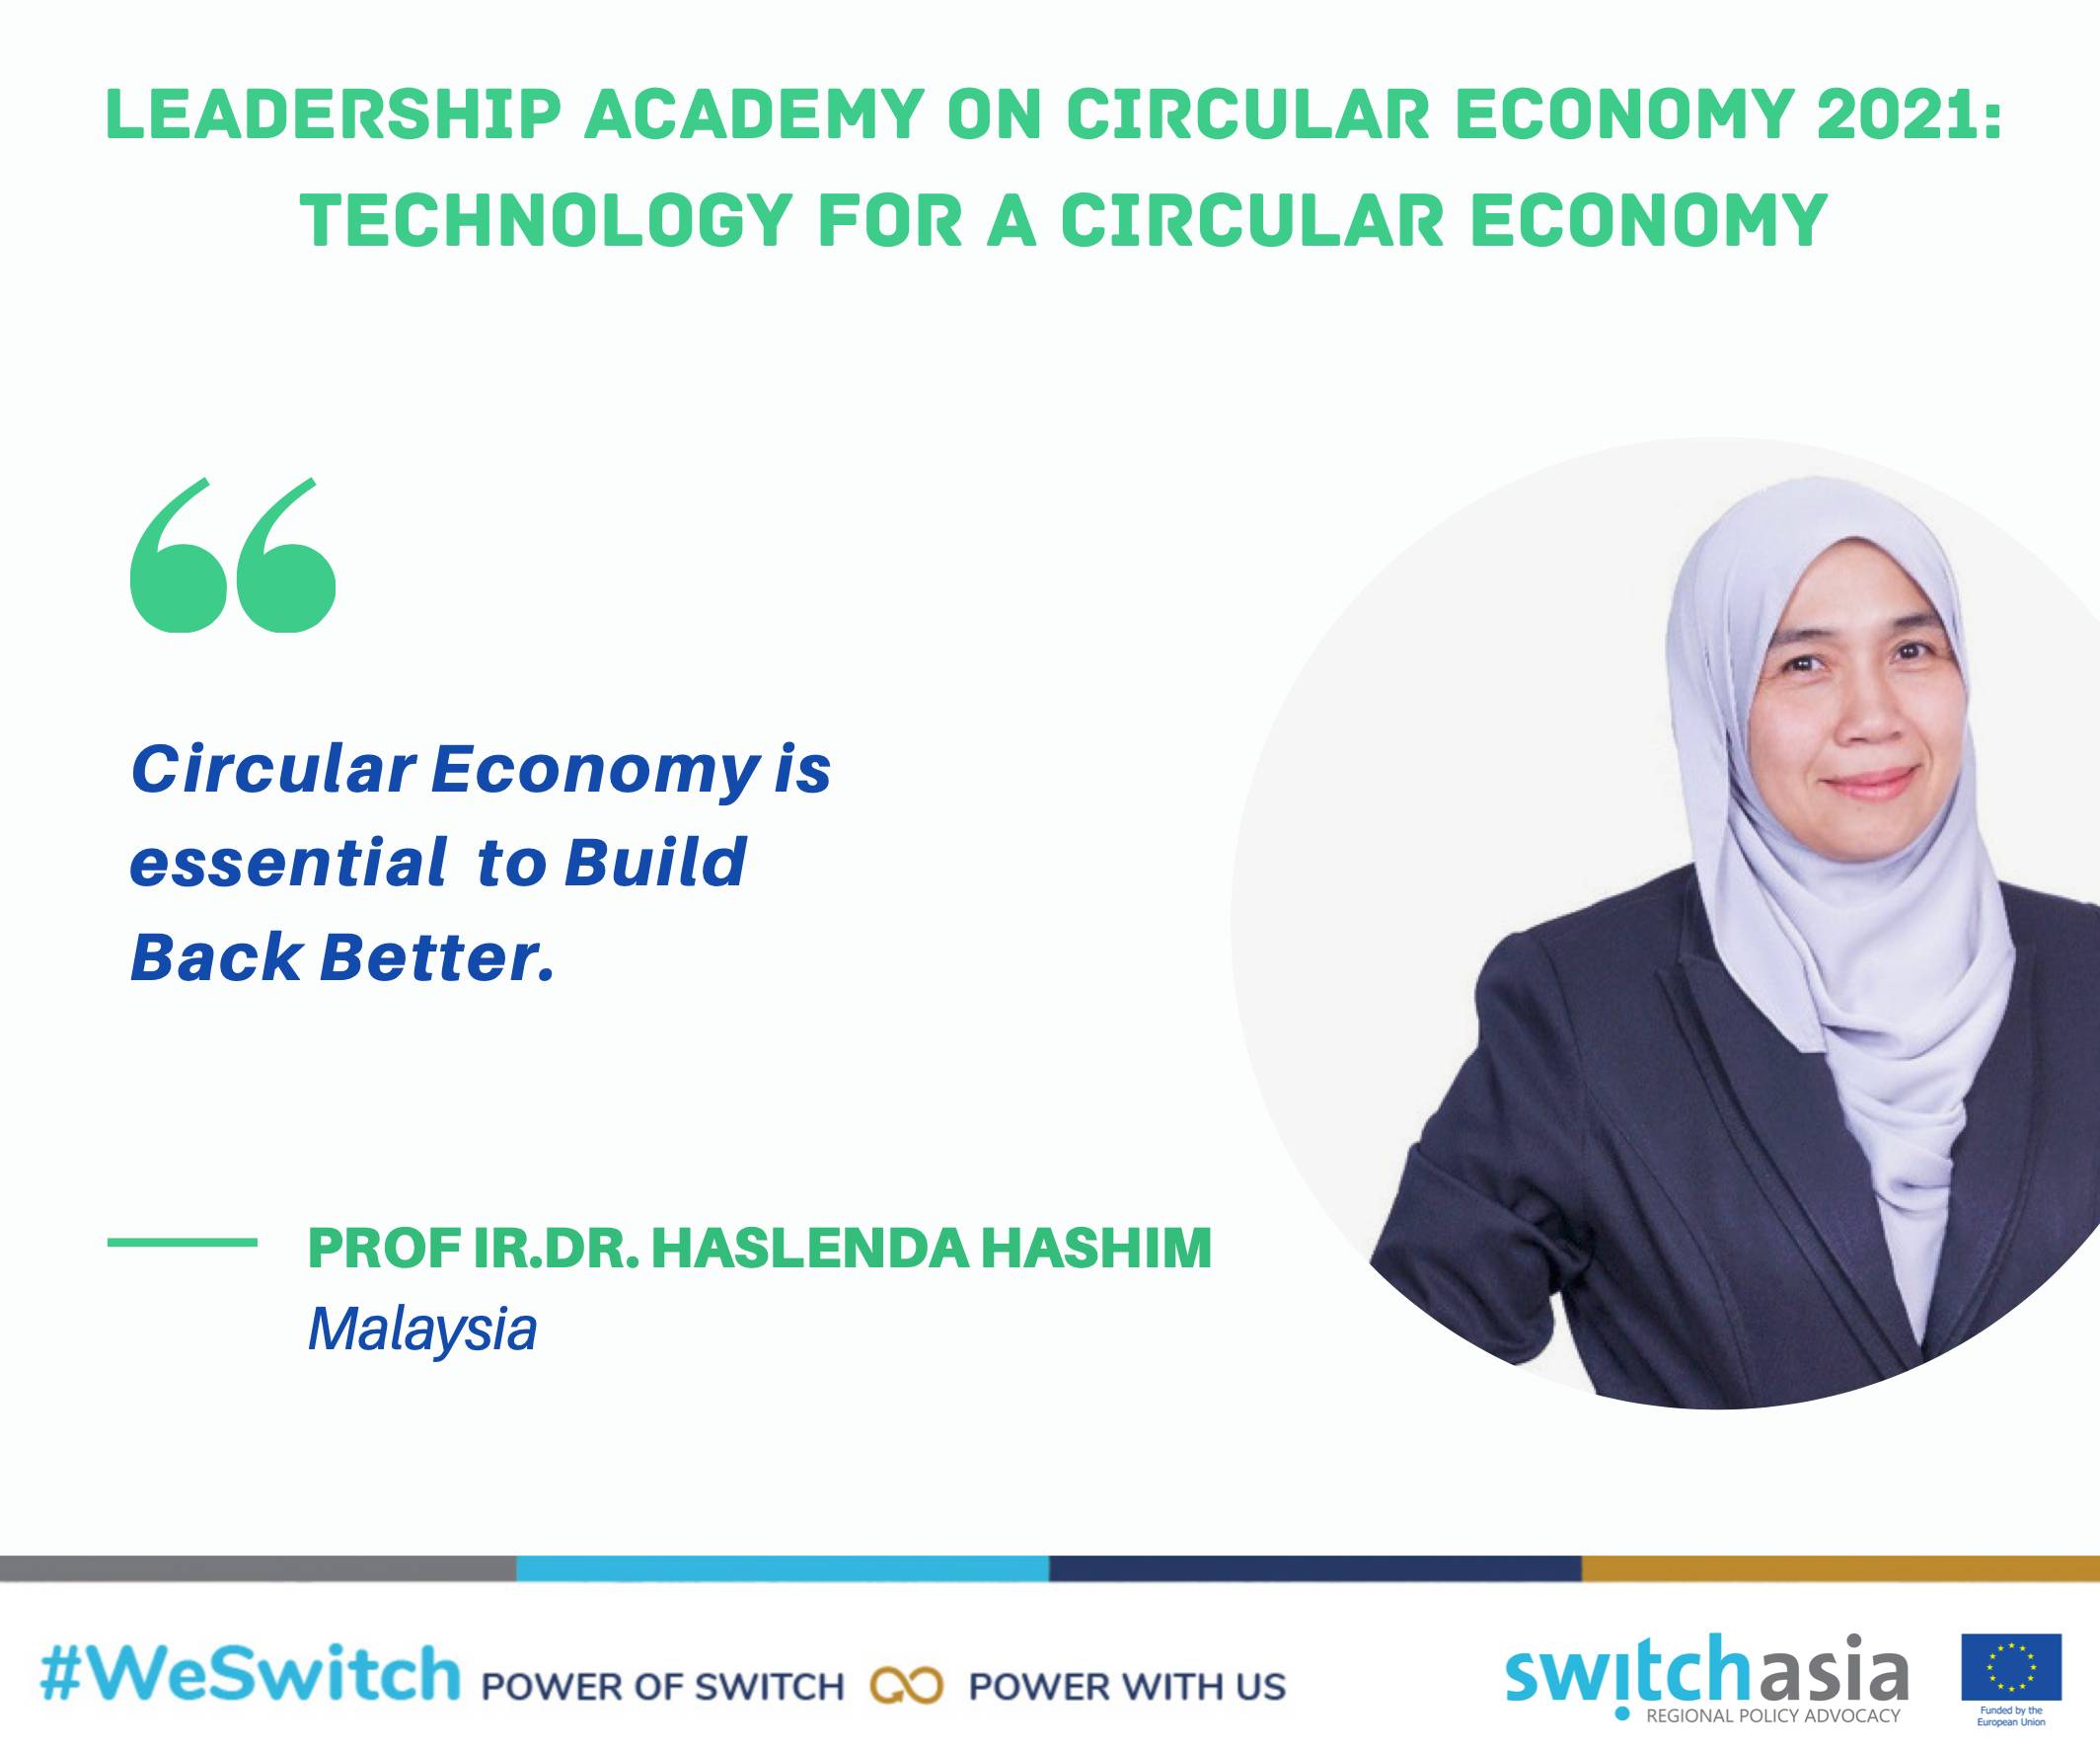 EU SWITCH-Asia 2021 Leadership Academy on Technology for A Circular Economy